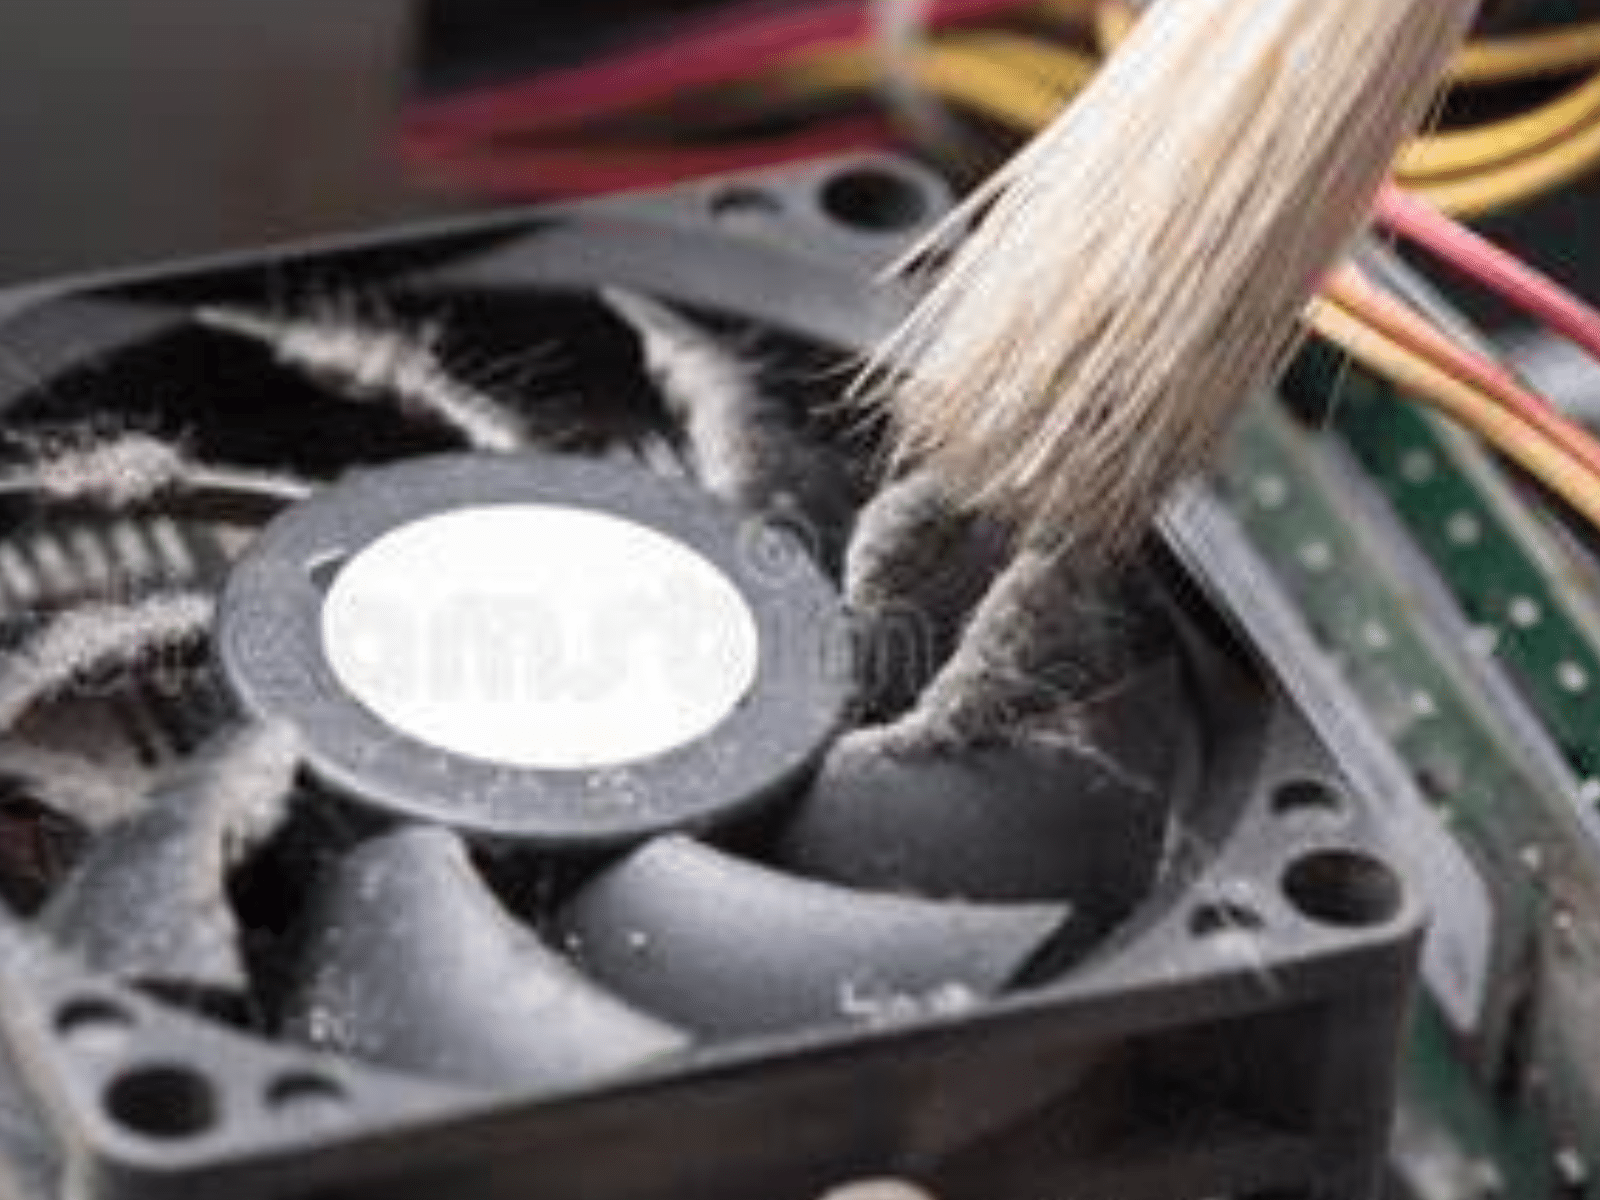 Clean the Surface of the Processor & Reattach CPU